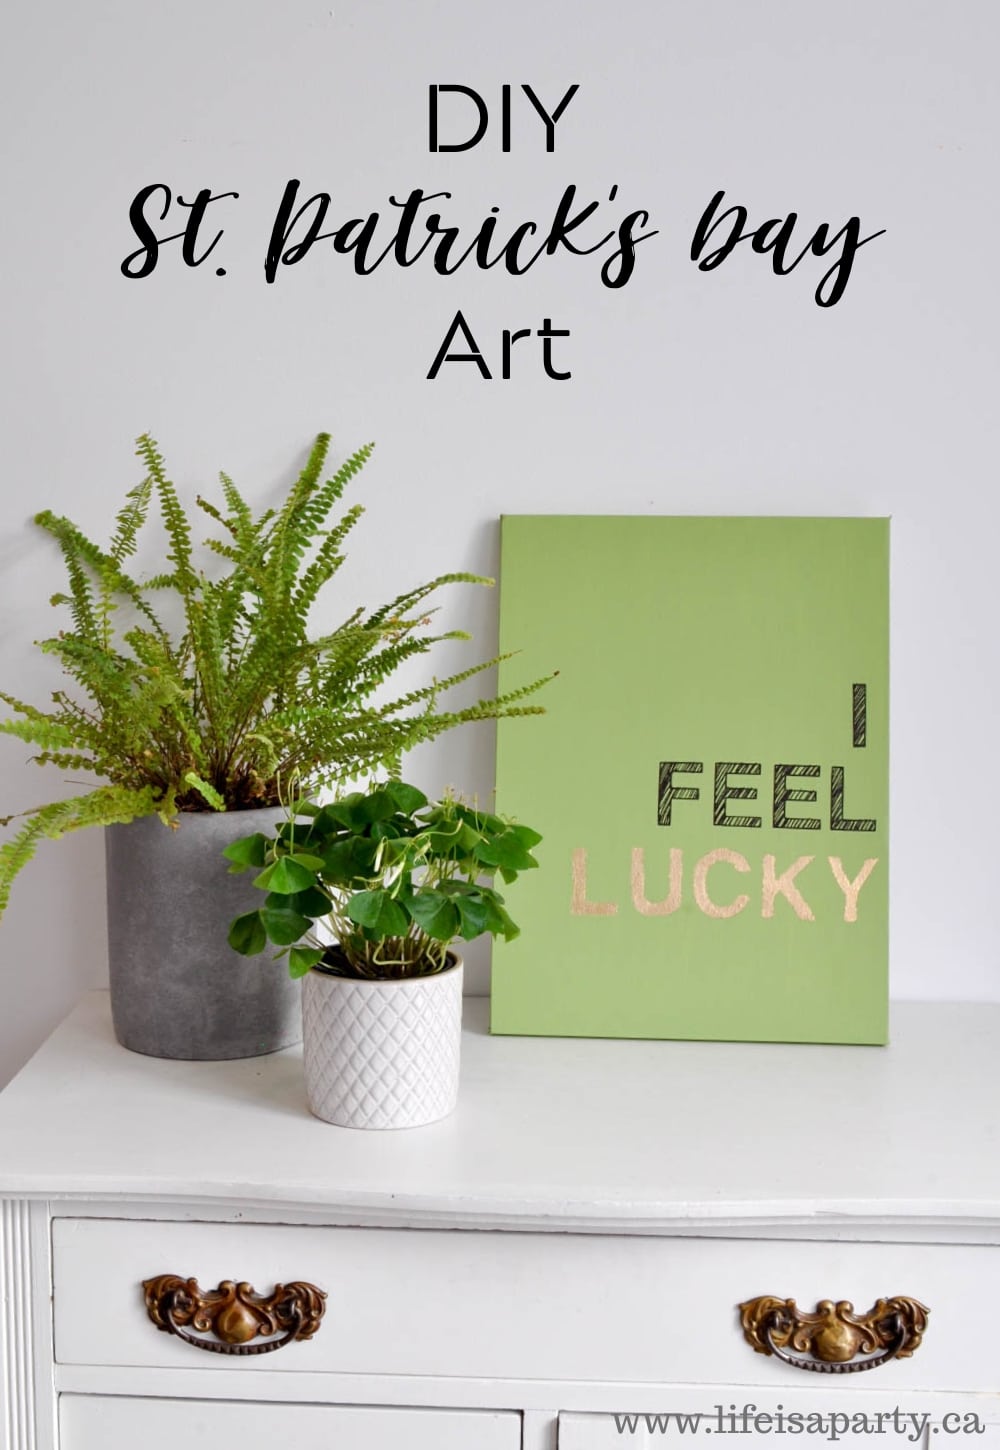 St Patrick's Day Art: use an inexpensive dollar store canvas to create this DIY St Patrick's Day Art that says "I Feel Lucky".